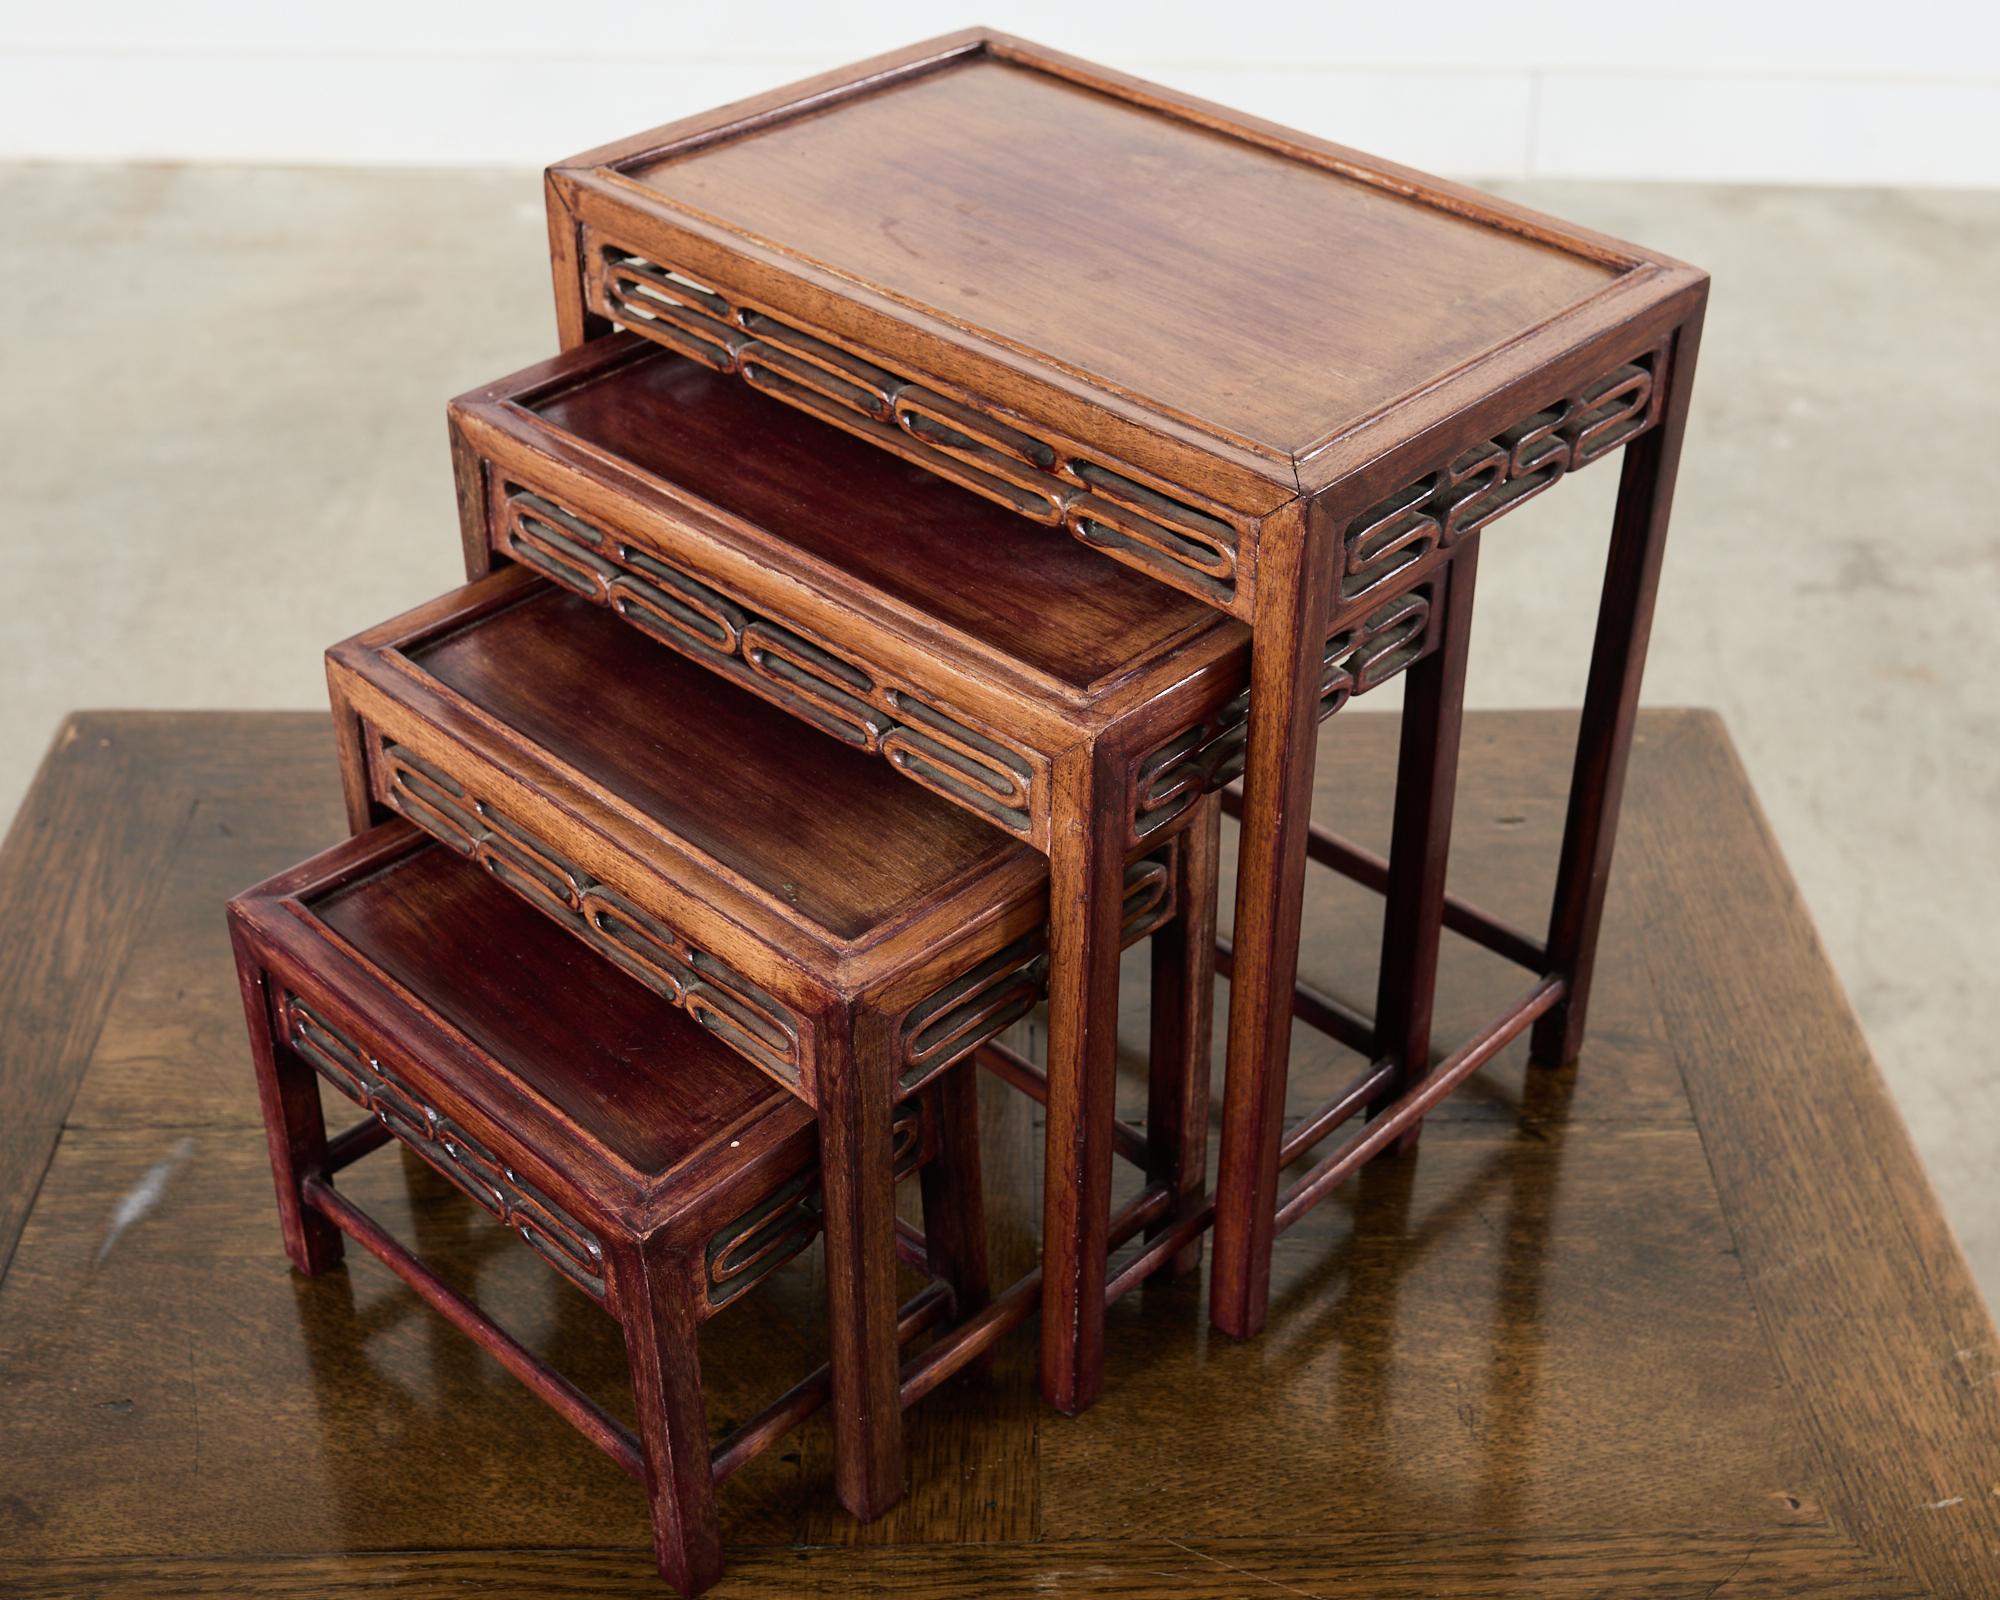 Set of Four Diminutive Chinese Export Hardwood Nesting Tables In Good Condition For Sale In Rio Vista, CA